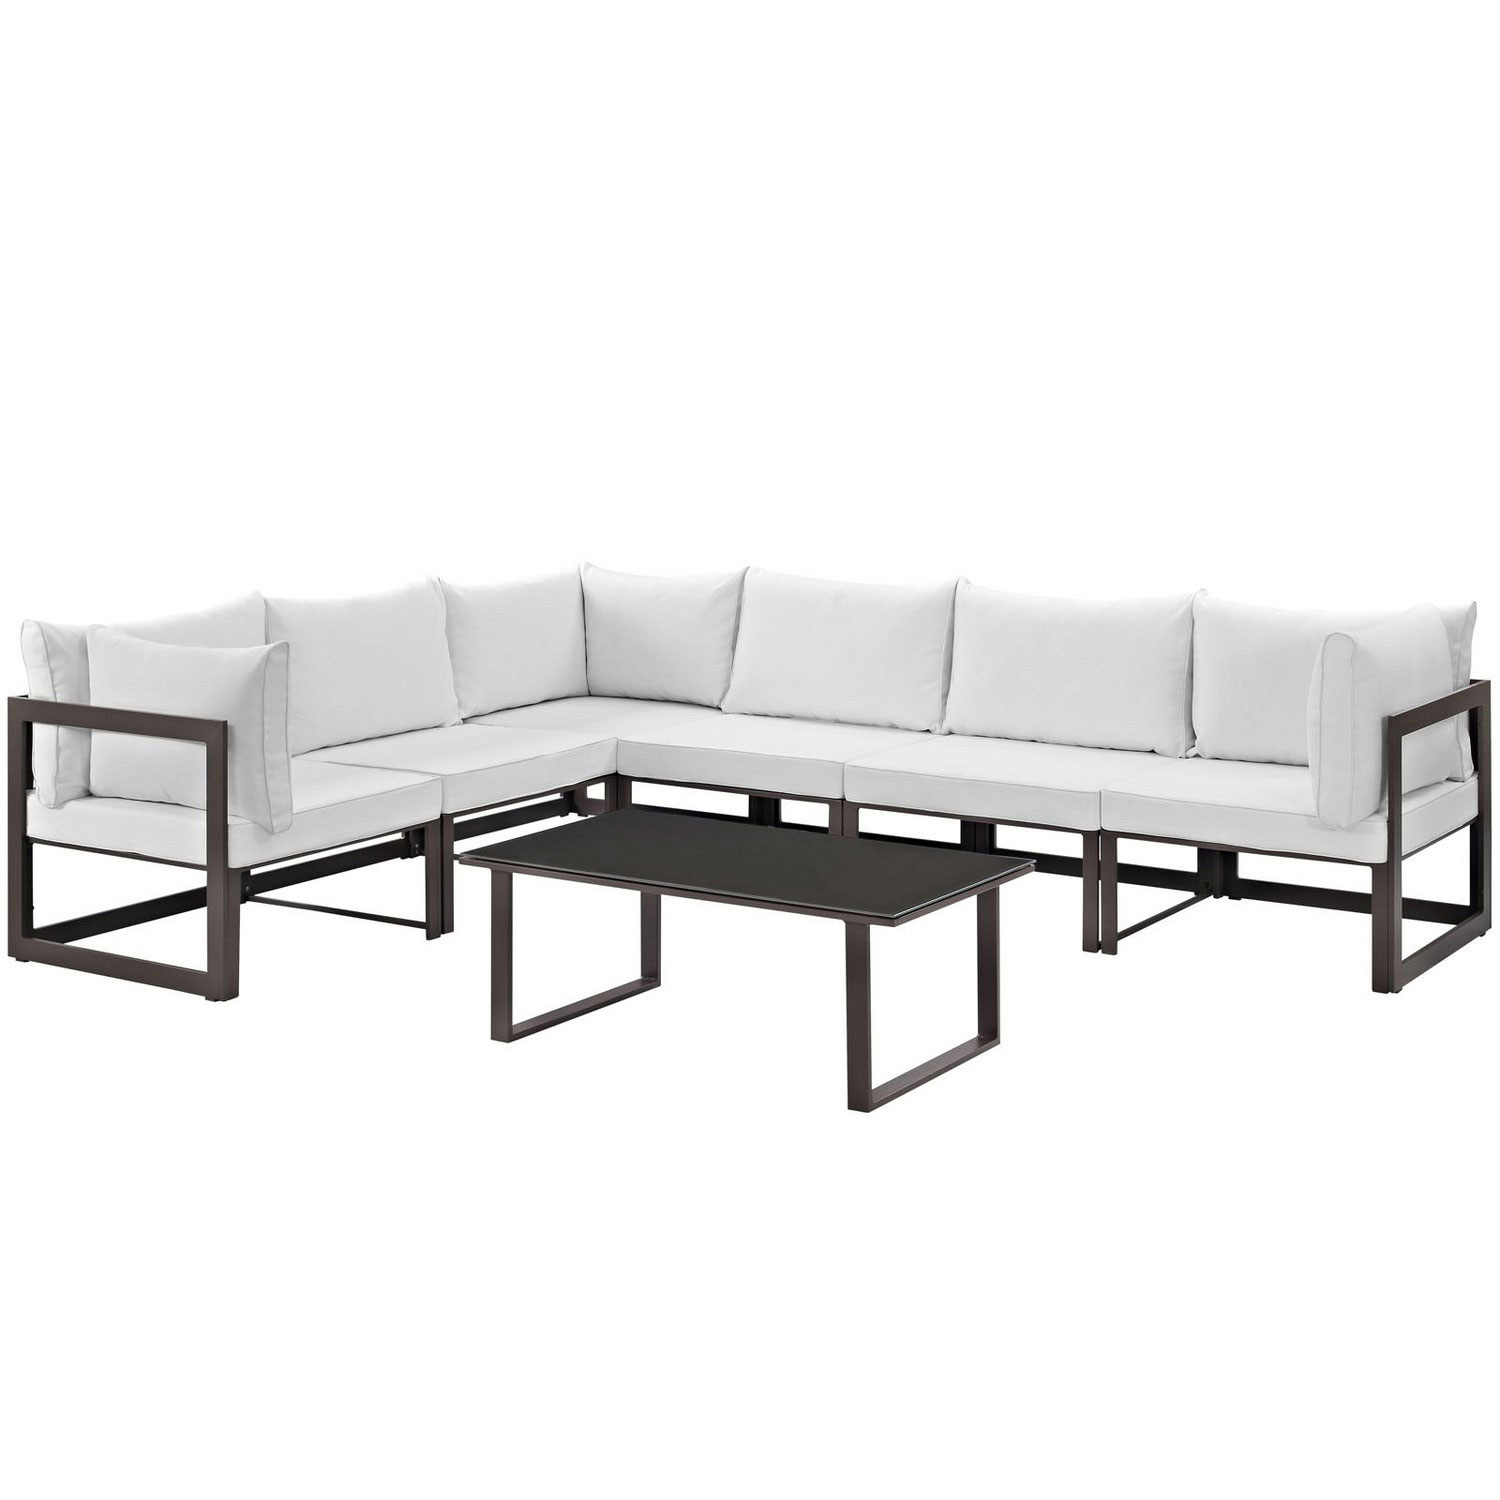 Modway Fortuna 7 Piece Outdoor Patio Sectional Sofa Set - Brown/White